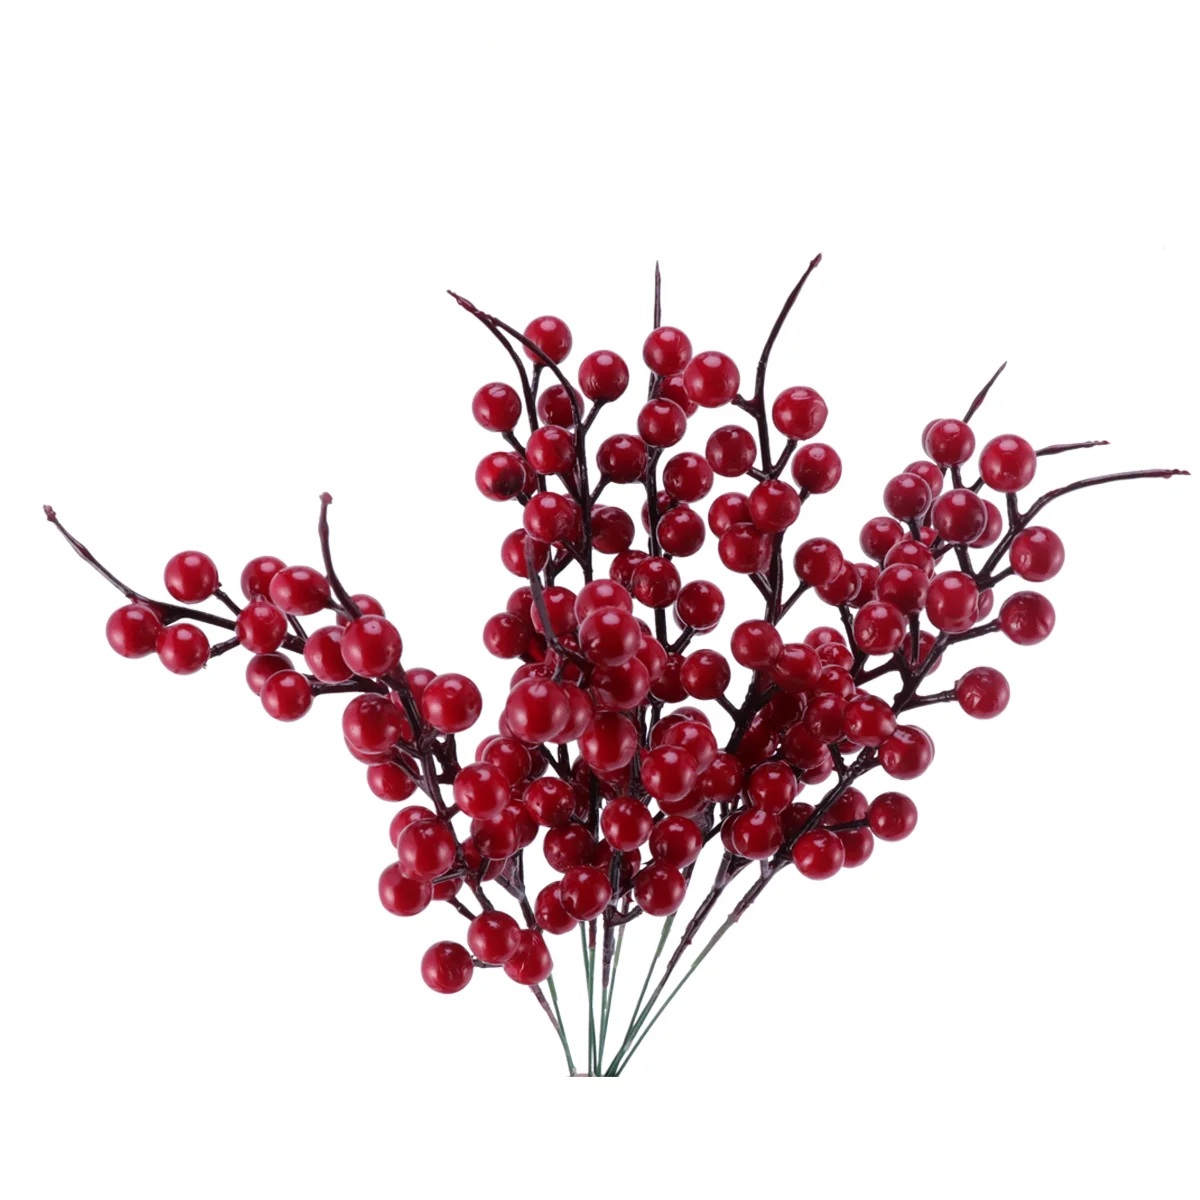 

Berry Red Artificial Christmas Xmasflower Simulation Decor Branches Stems Berries Simulated Decoration Home Color Realistic Tree